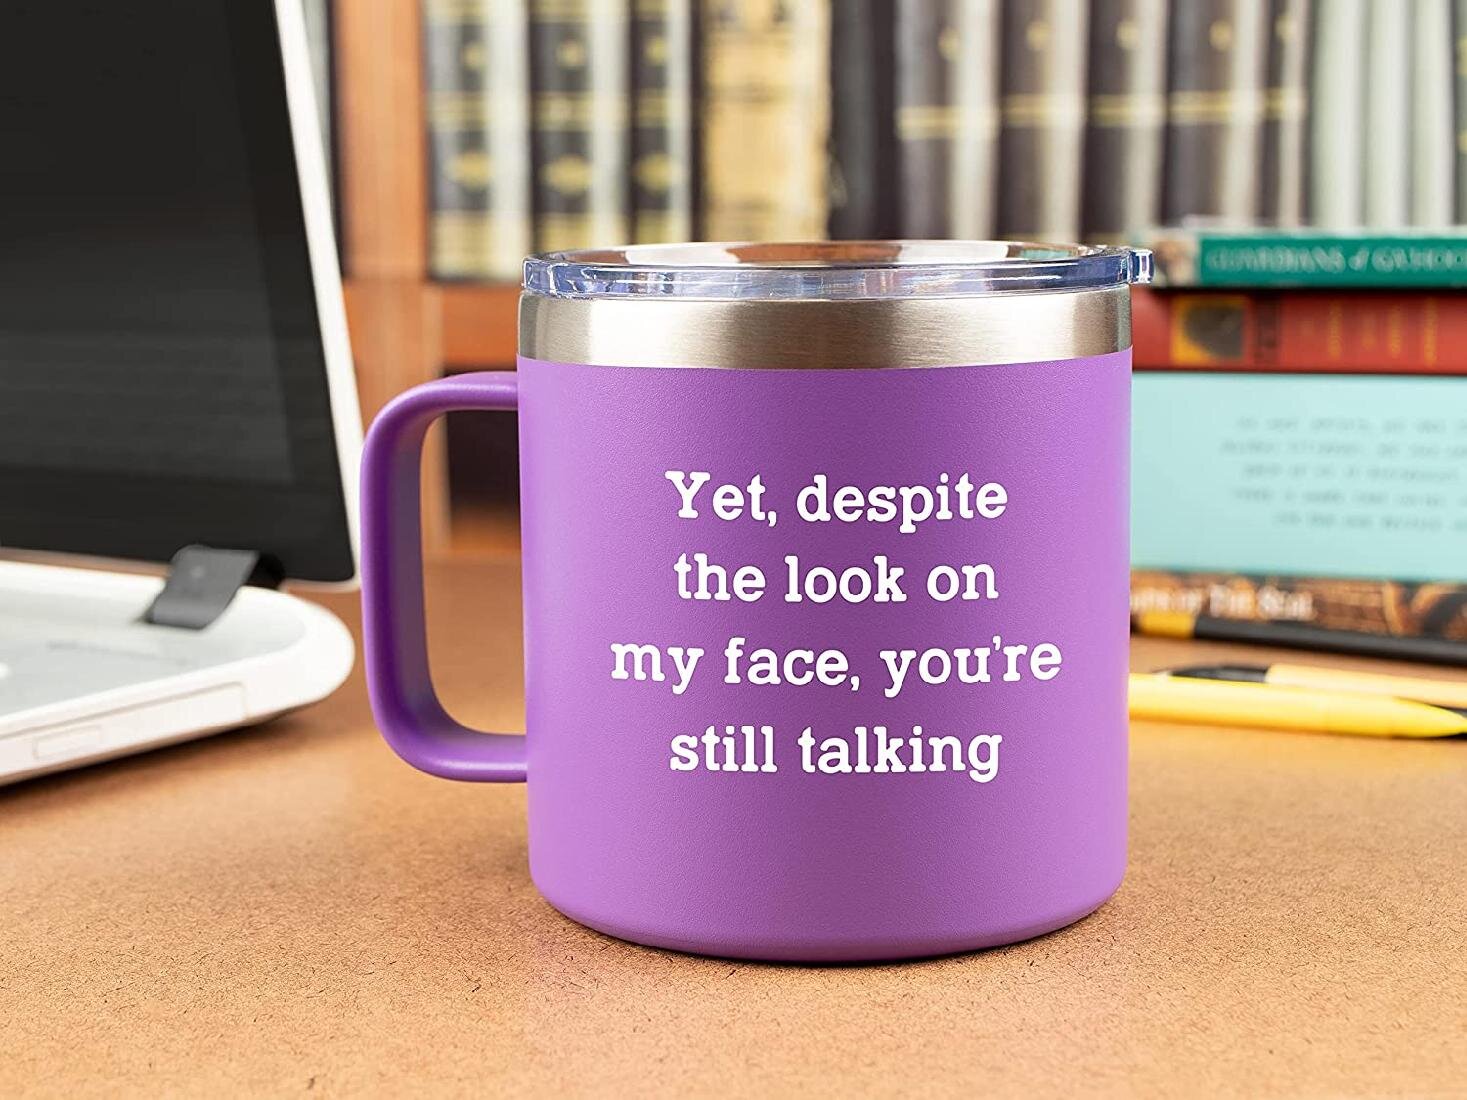 AND YET DESPITE THE LOOK ON MY FACE SARCASTIC FUNNY NOVELTY MUG CUP GIFT 